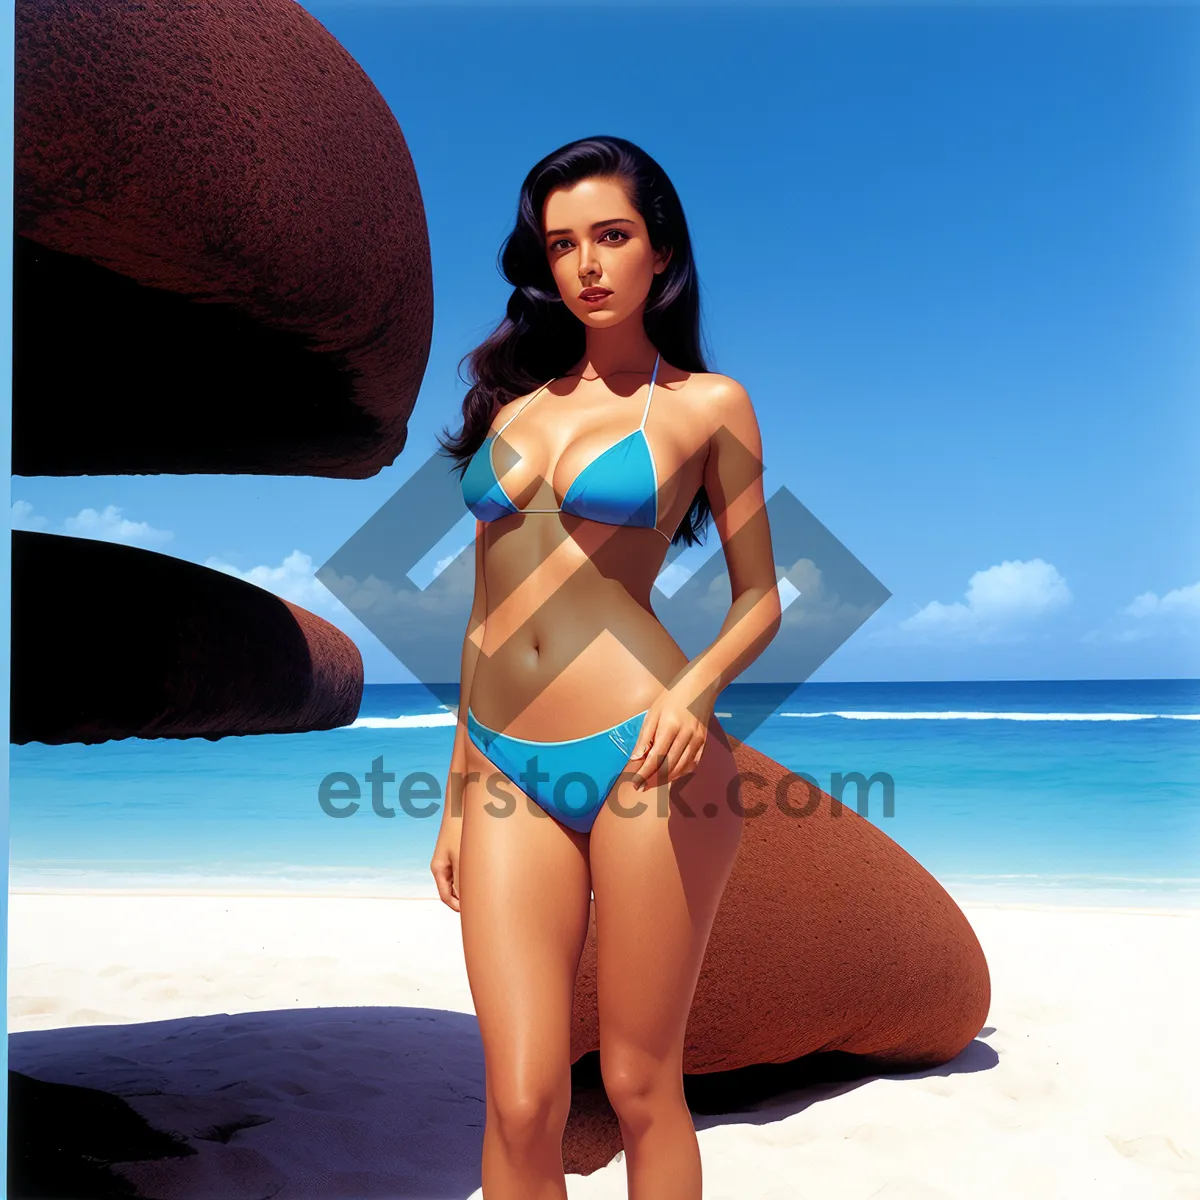 Picture of Exotic Beachwear: Stylish Swimsuit on Tropical Sand